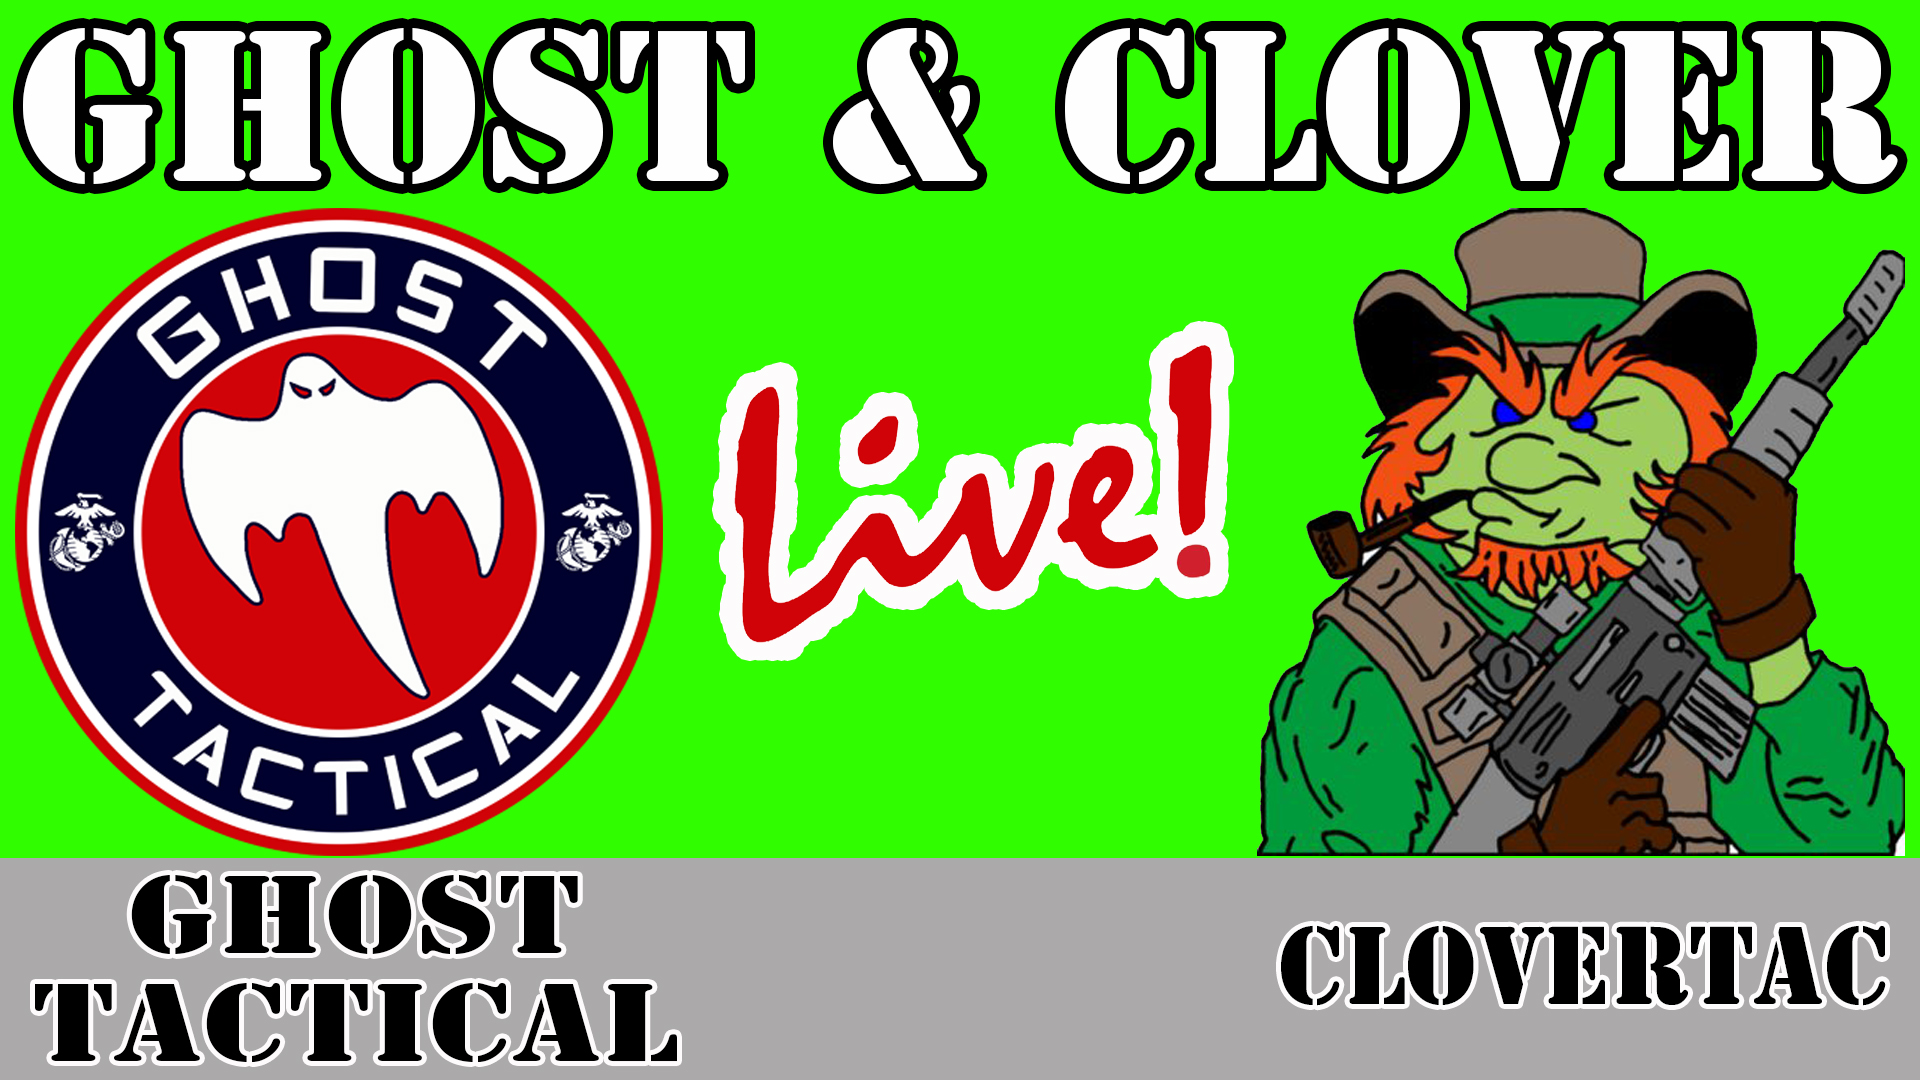 Ghost & Clover LIVE! Q&A and Rabbit-Hole Mania